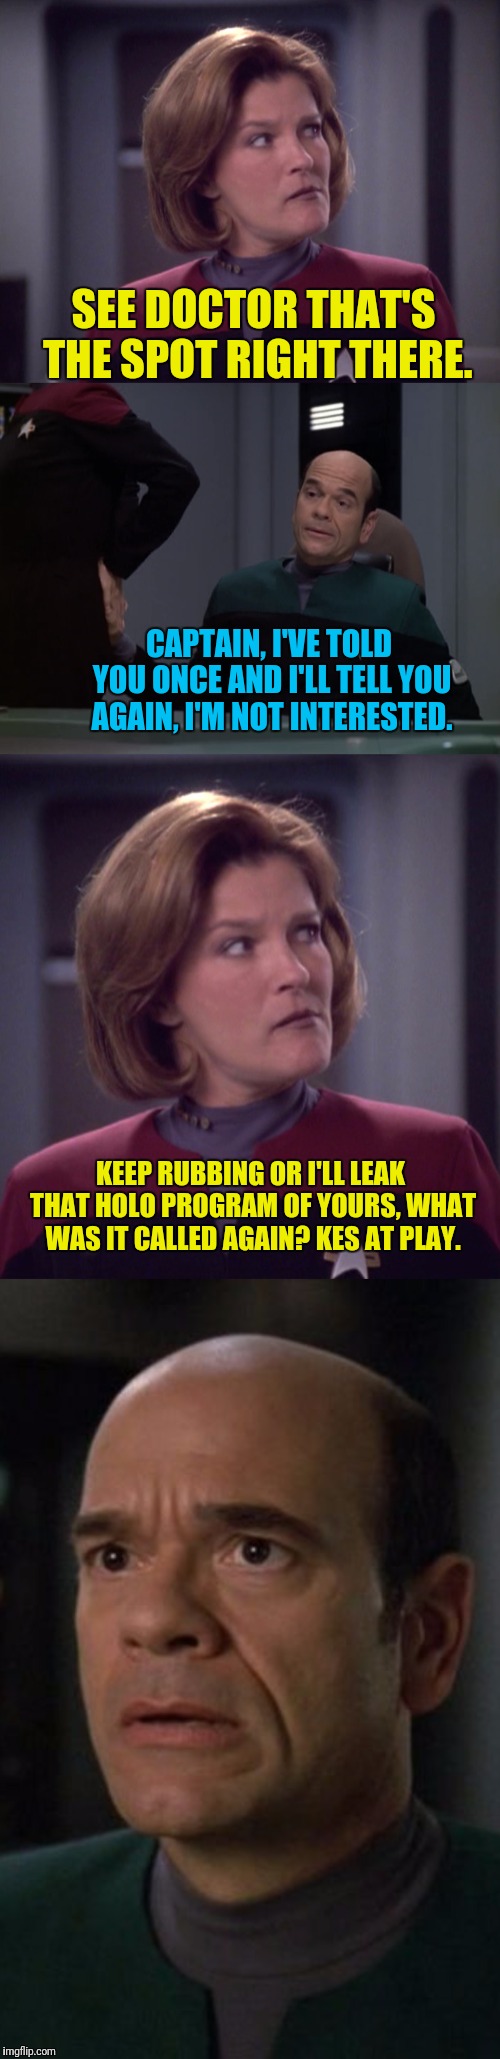 Holoquin Novel | SEE DOCTOR THAT'S THE SPOT RIGHT THERE. CAPTAIN, I'VE TOLD YOU ONCE AND I'LL TELL YOU AGAIN, I'M NOT INTERESTED. KEEP RUBBING OR I'LL LEAK THAT HOLO PROGRAM OF YOURS, WHAT WAS IT CALLED AGAIN? KES AT PLAY. | image tagged in star trek voyager,janeway,the doctor,playing,naughty | made w/ Imgflip meme maker